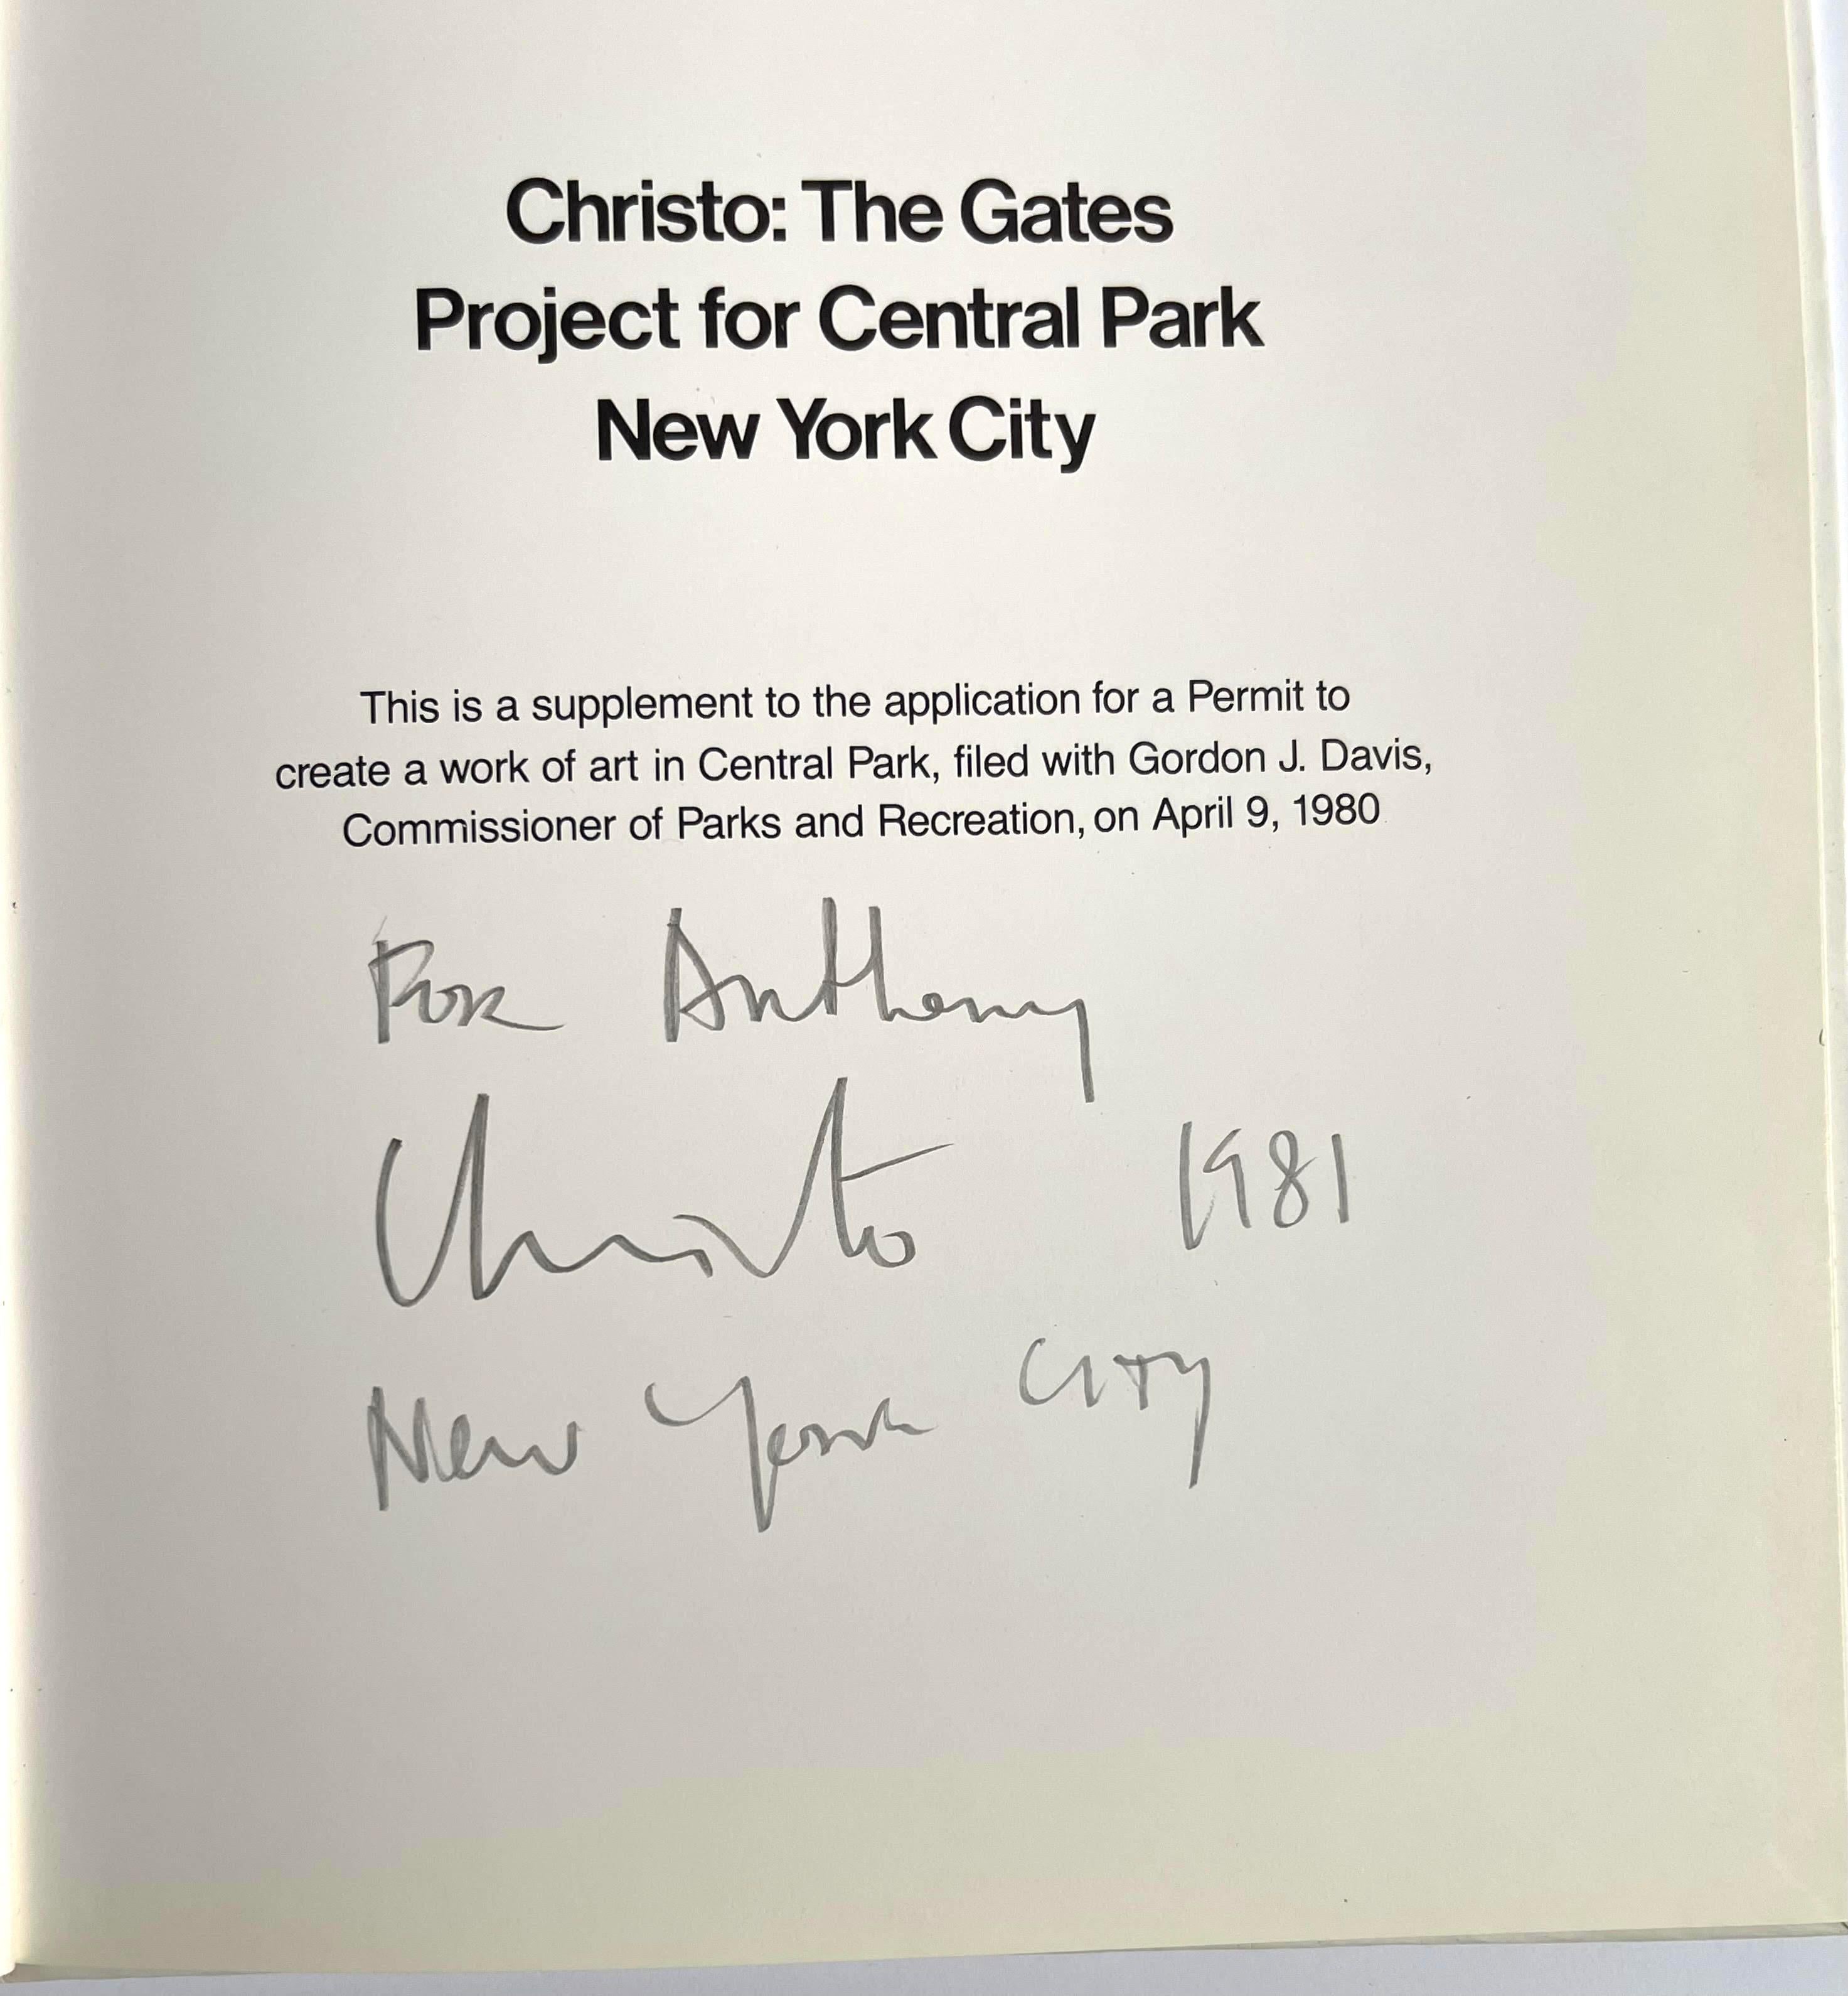 Book:
Christo: The Gates Project for Central Park New York City (Hand Signed and Inscribed to art critic Anthony Haden-Guest), 1981
Hardback monograph 
Hand signed and inscribed to art critic, writer and man-about-town Anthony Haden-Guest
11 1/4 × 9